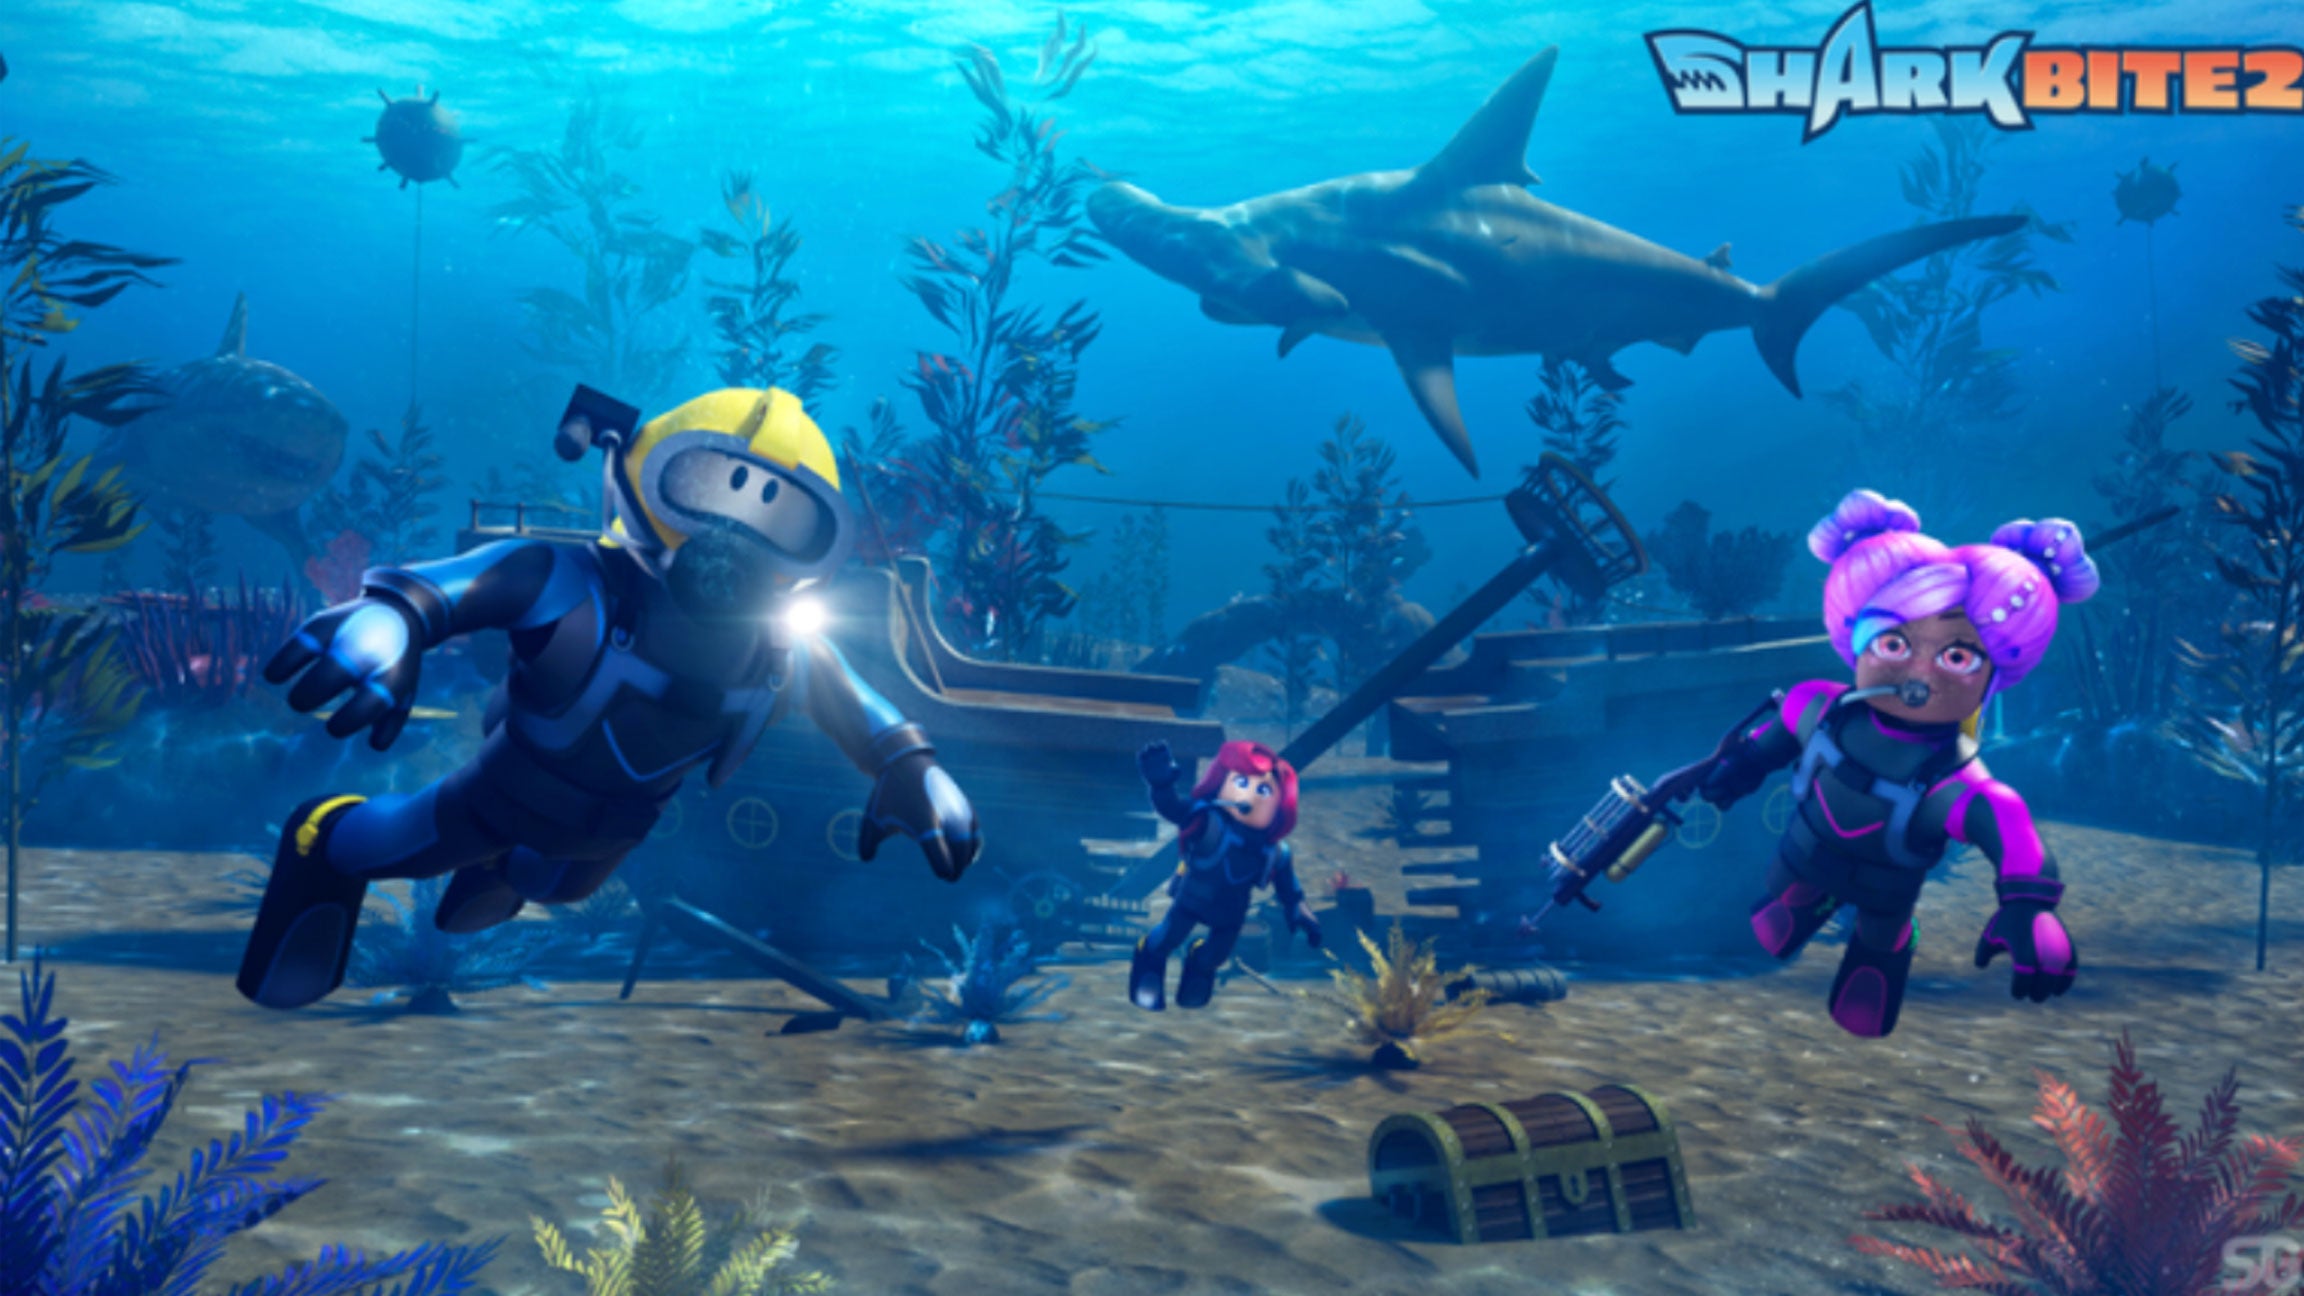 SharkBite 2 key art showing Roblox characters underwater and a shark lurking in the background.